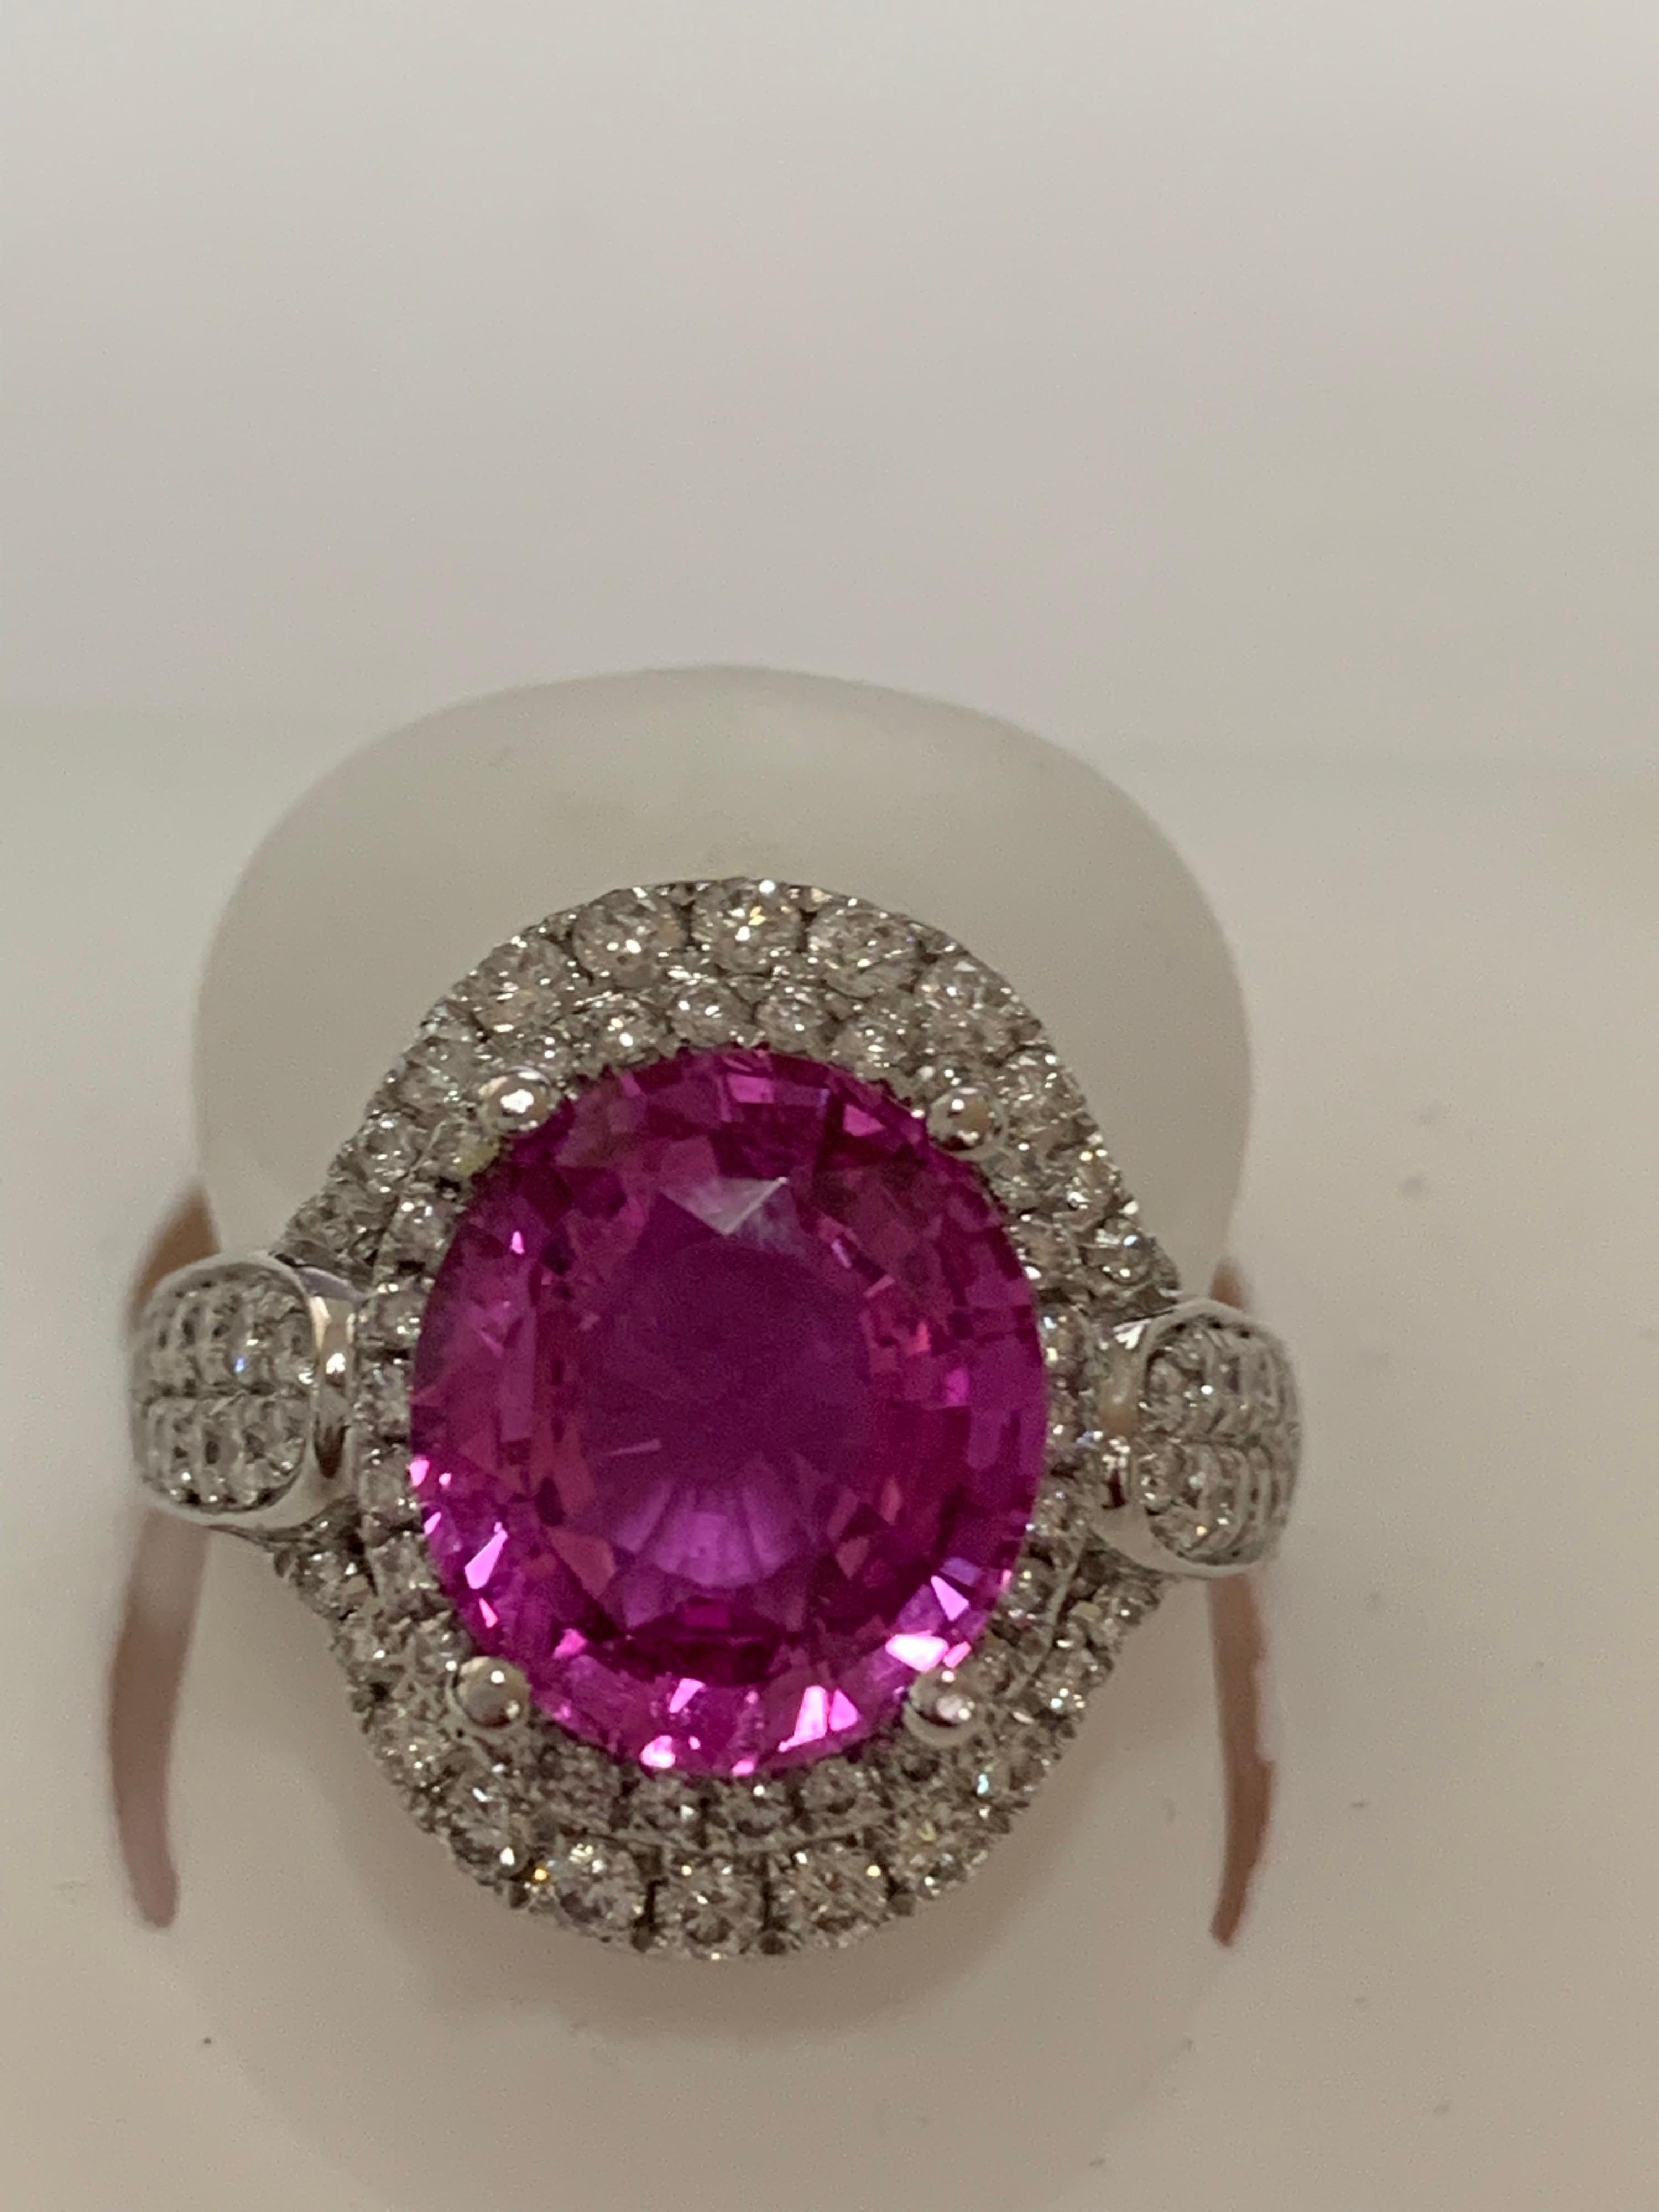 Contemporary GIA Certified 5.12 Carat Pink sapphire and Diamonds Ring